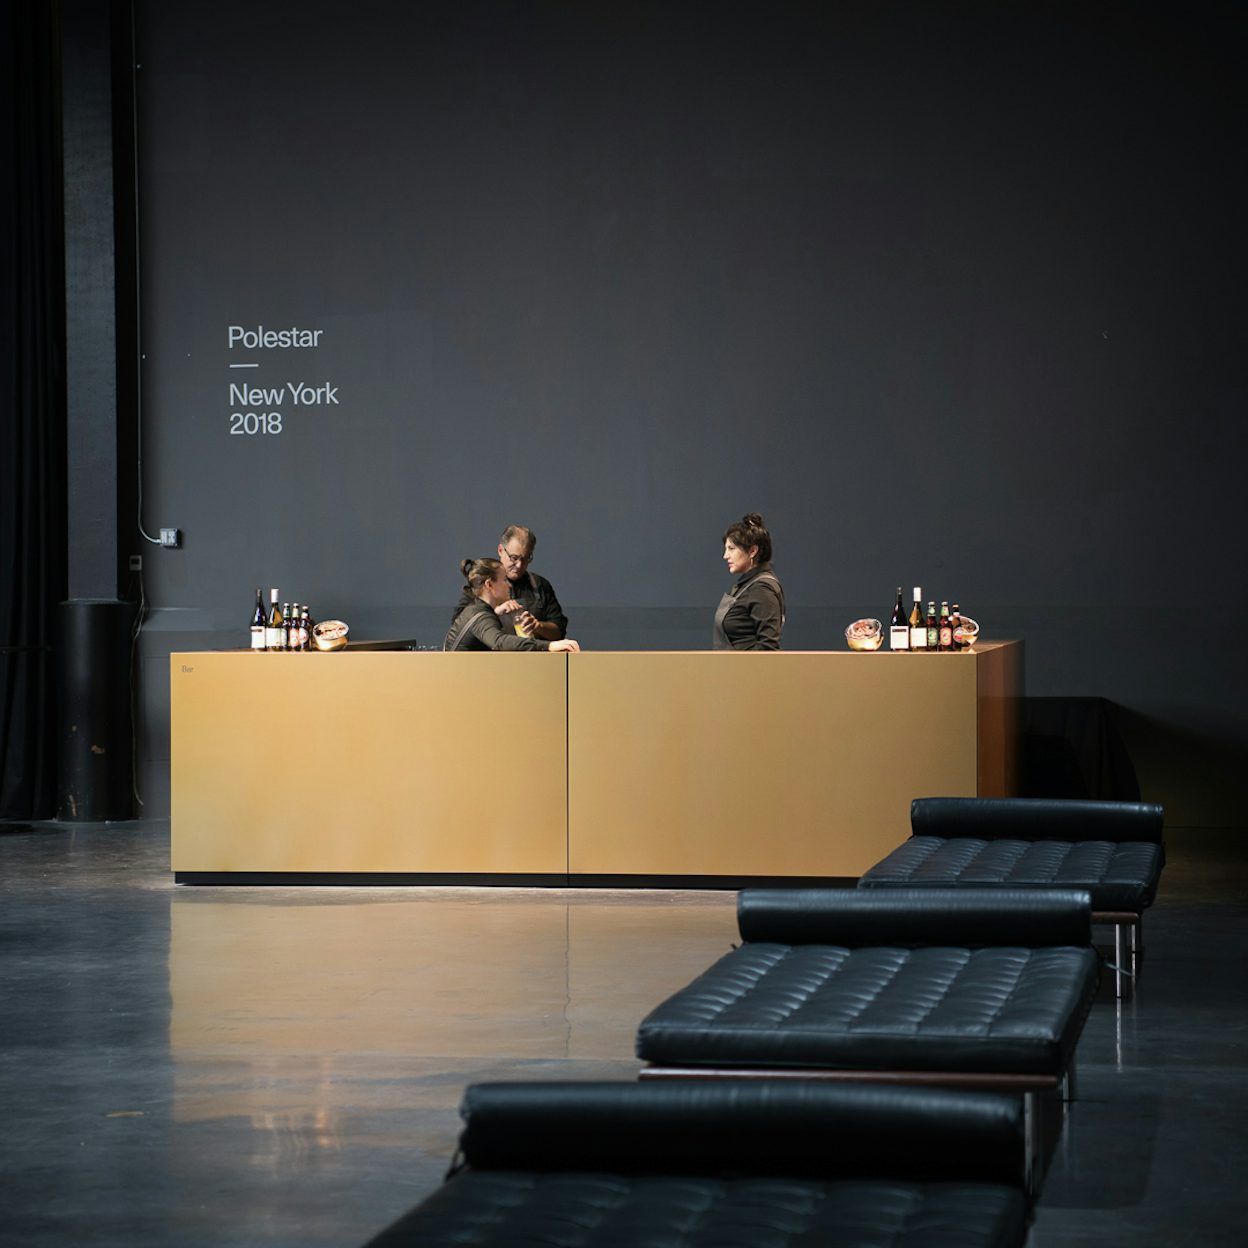 Three people behind a bar in front of a black wall with the text Polestar New York 2018